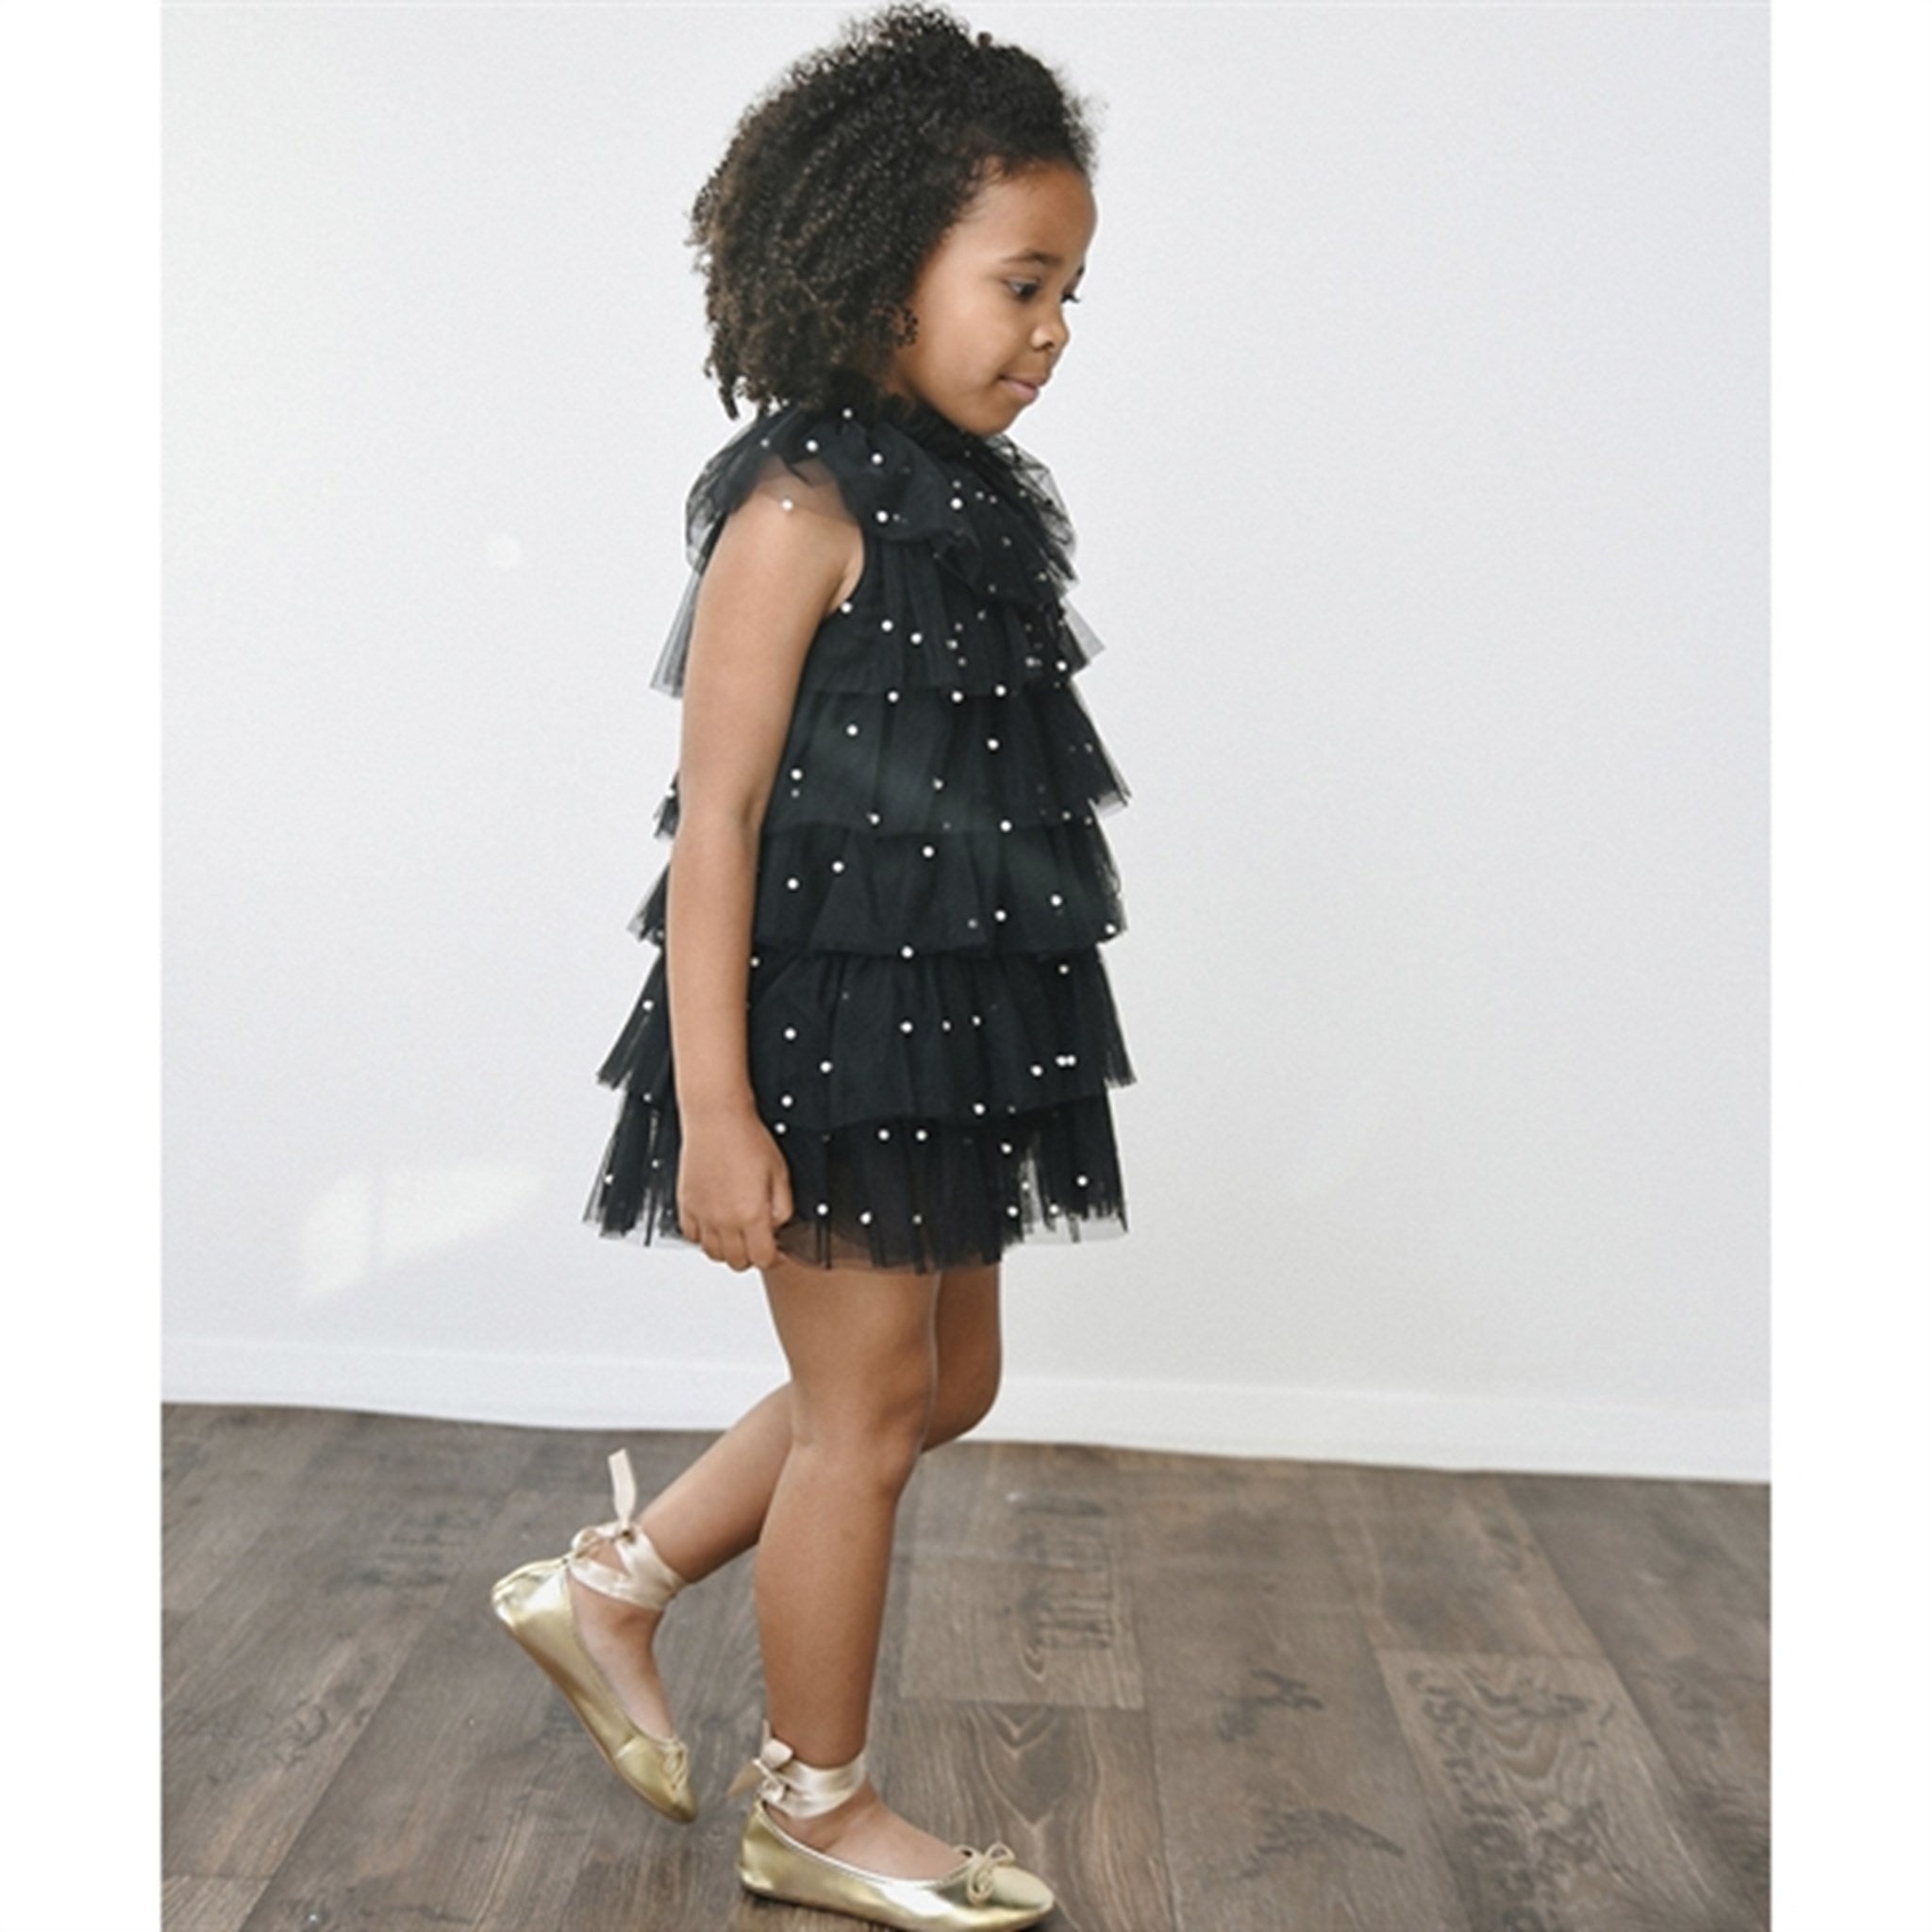 Dolly by Le Petit Tom Pearl Tutully Tiered Tulle Tuttu Dress Black 5